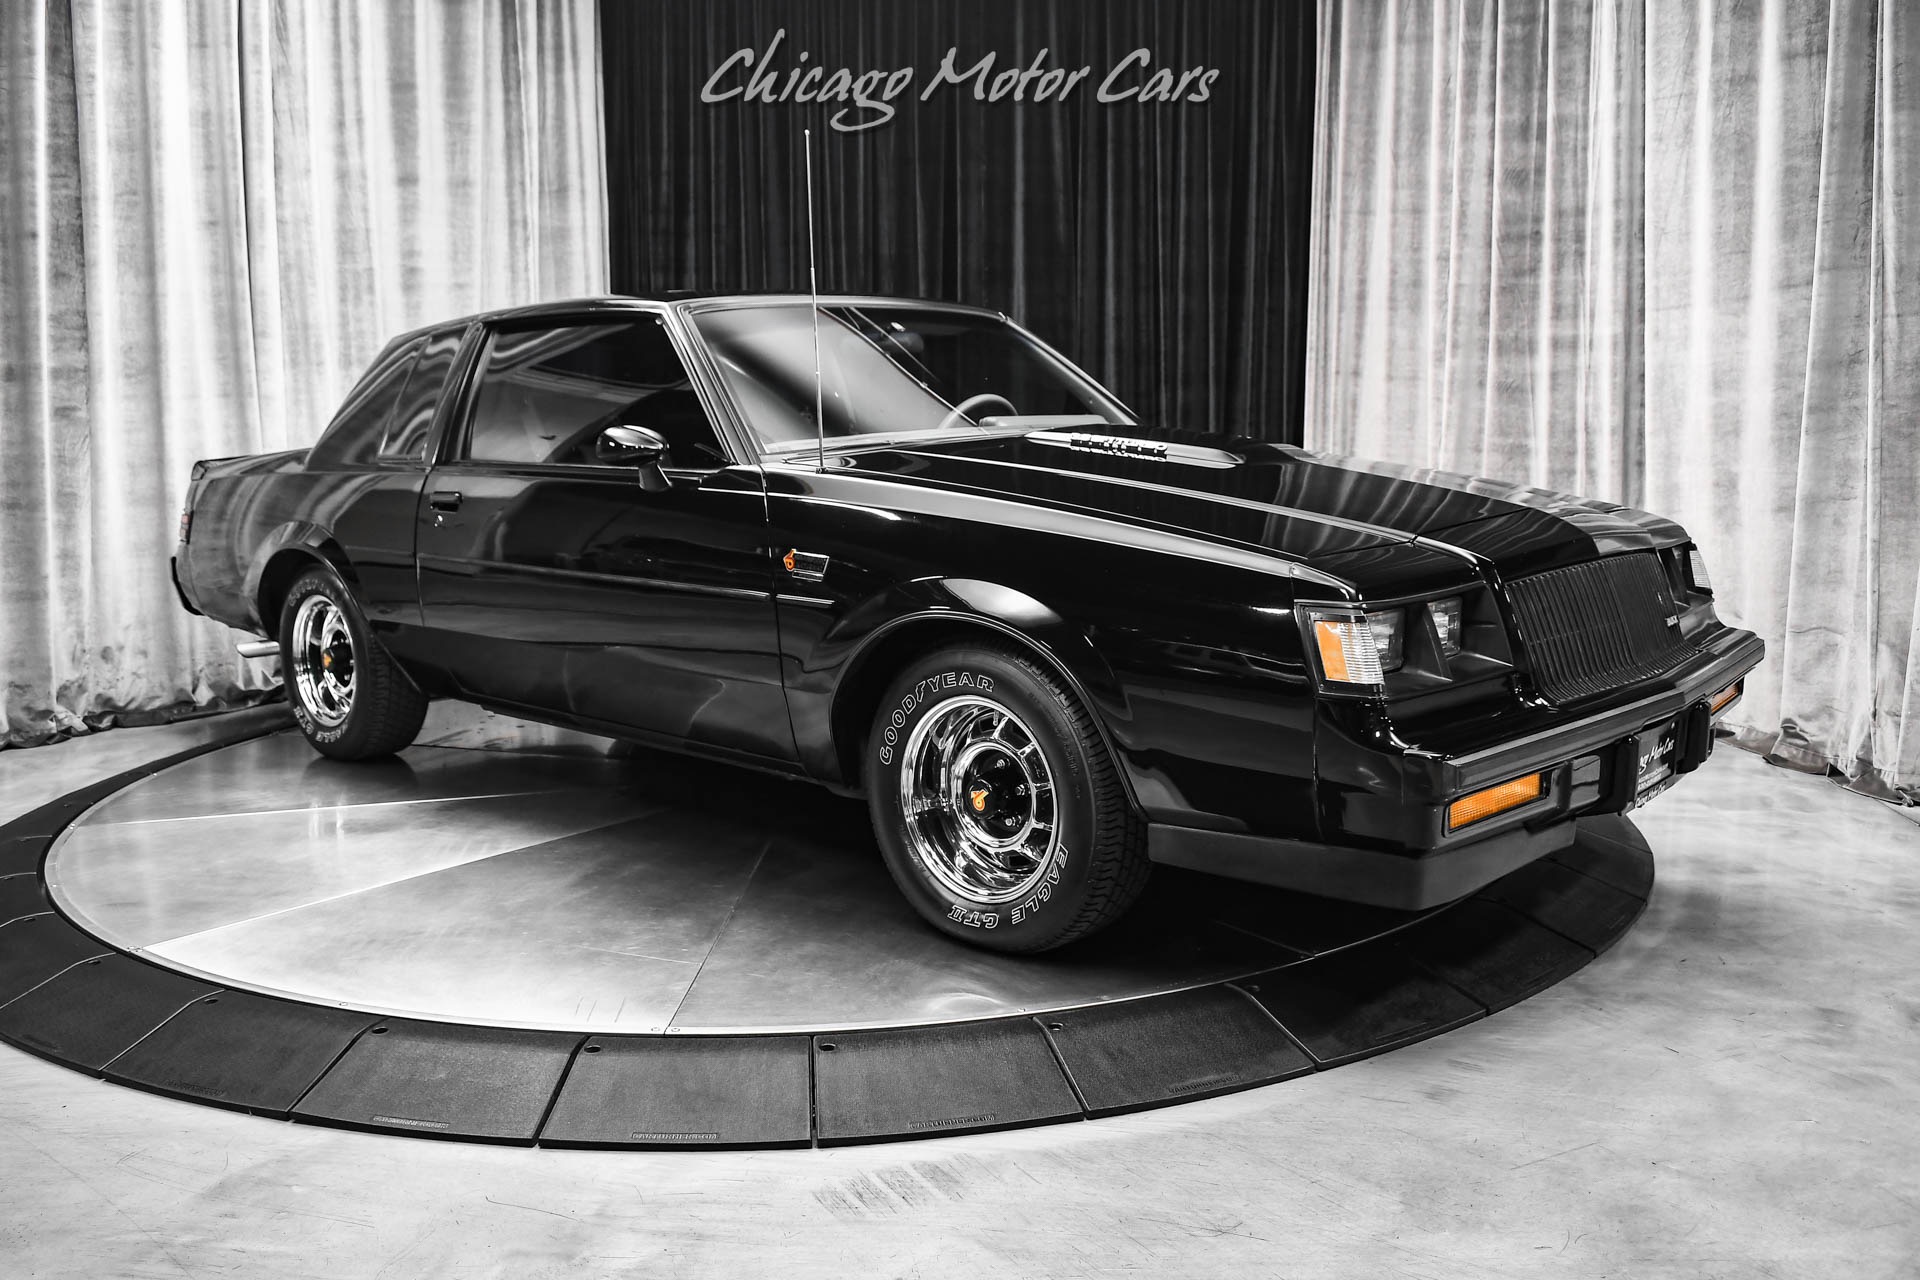 Used-1987-Buick-Regal-Grand-National-Turbo-Only-36k-Miles-Legendary-Vehicle-Super-Clean